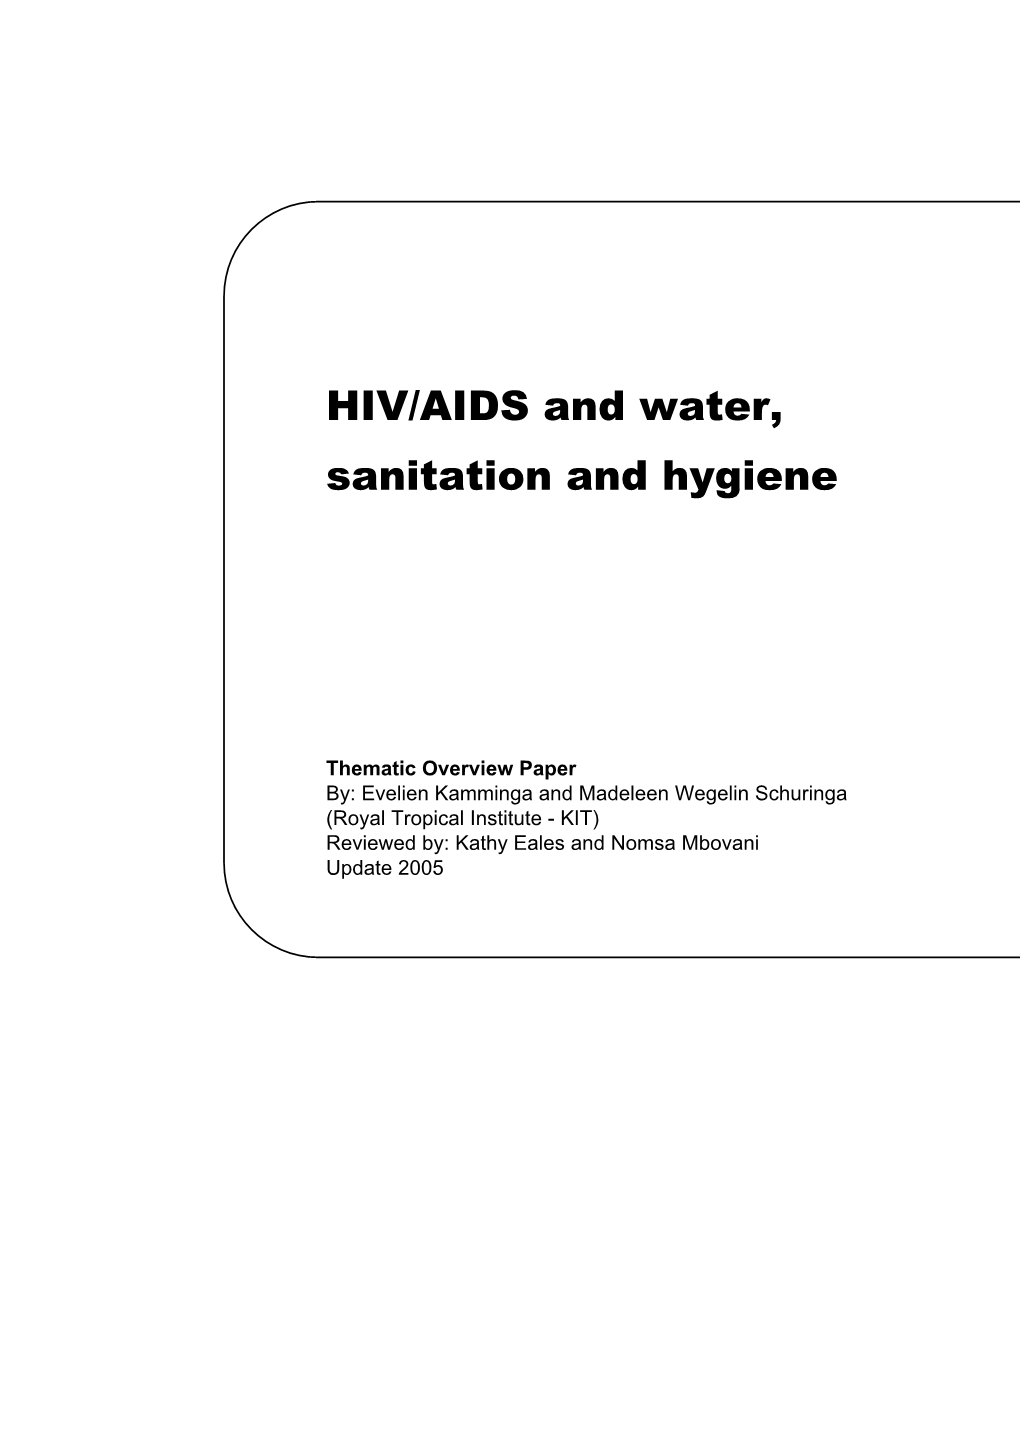 HIV/AIDS and Water, Sanitation and Hygiene